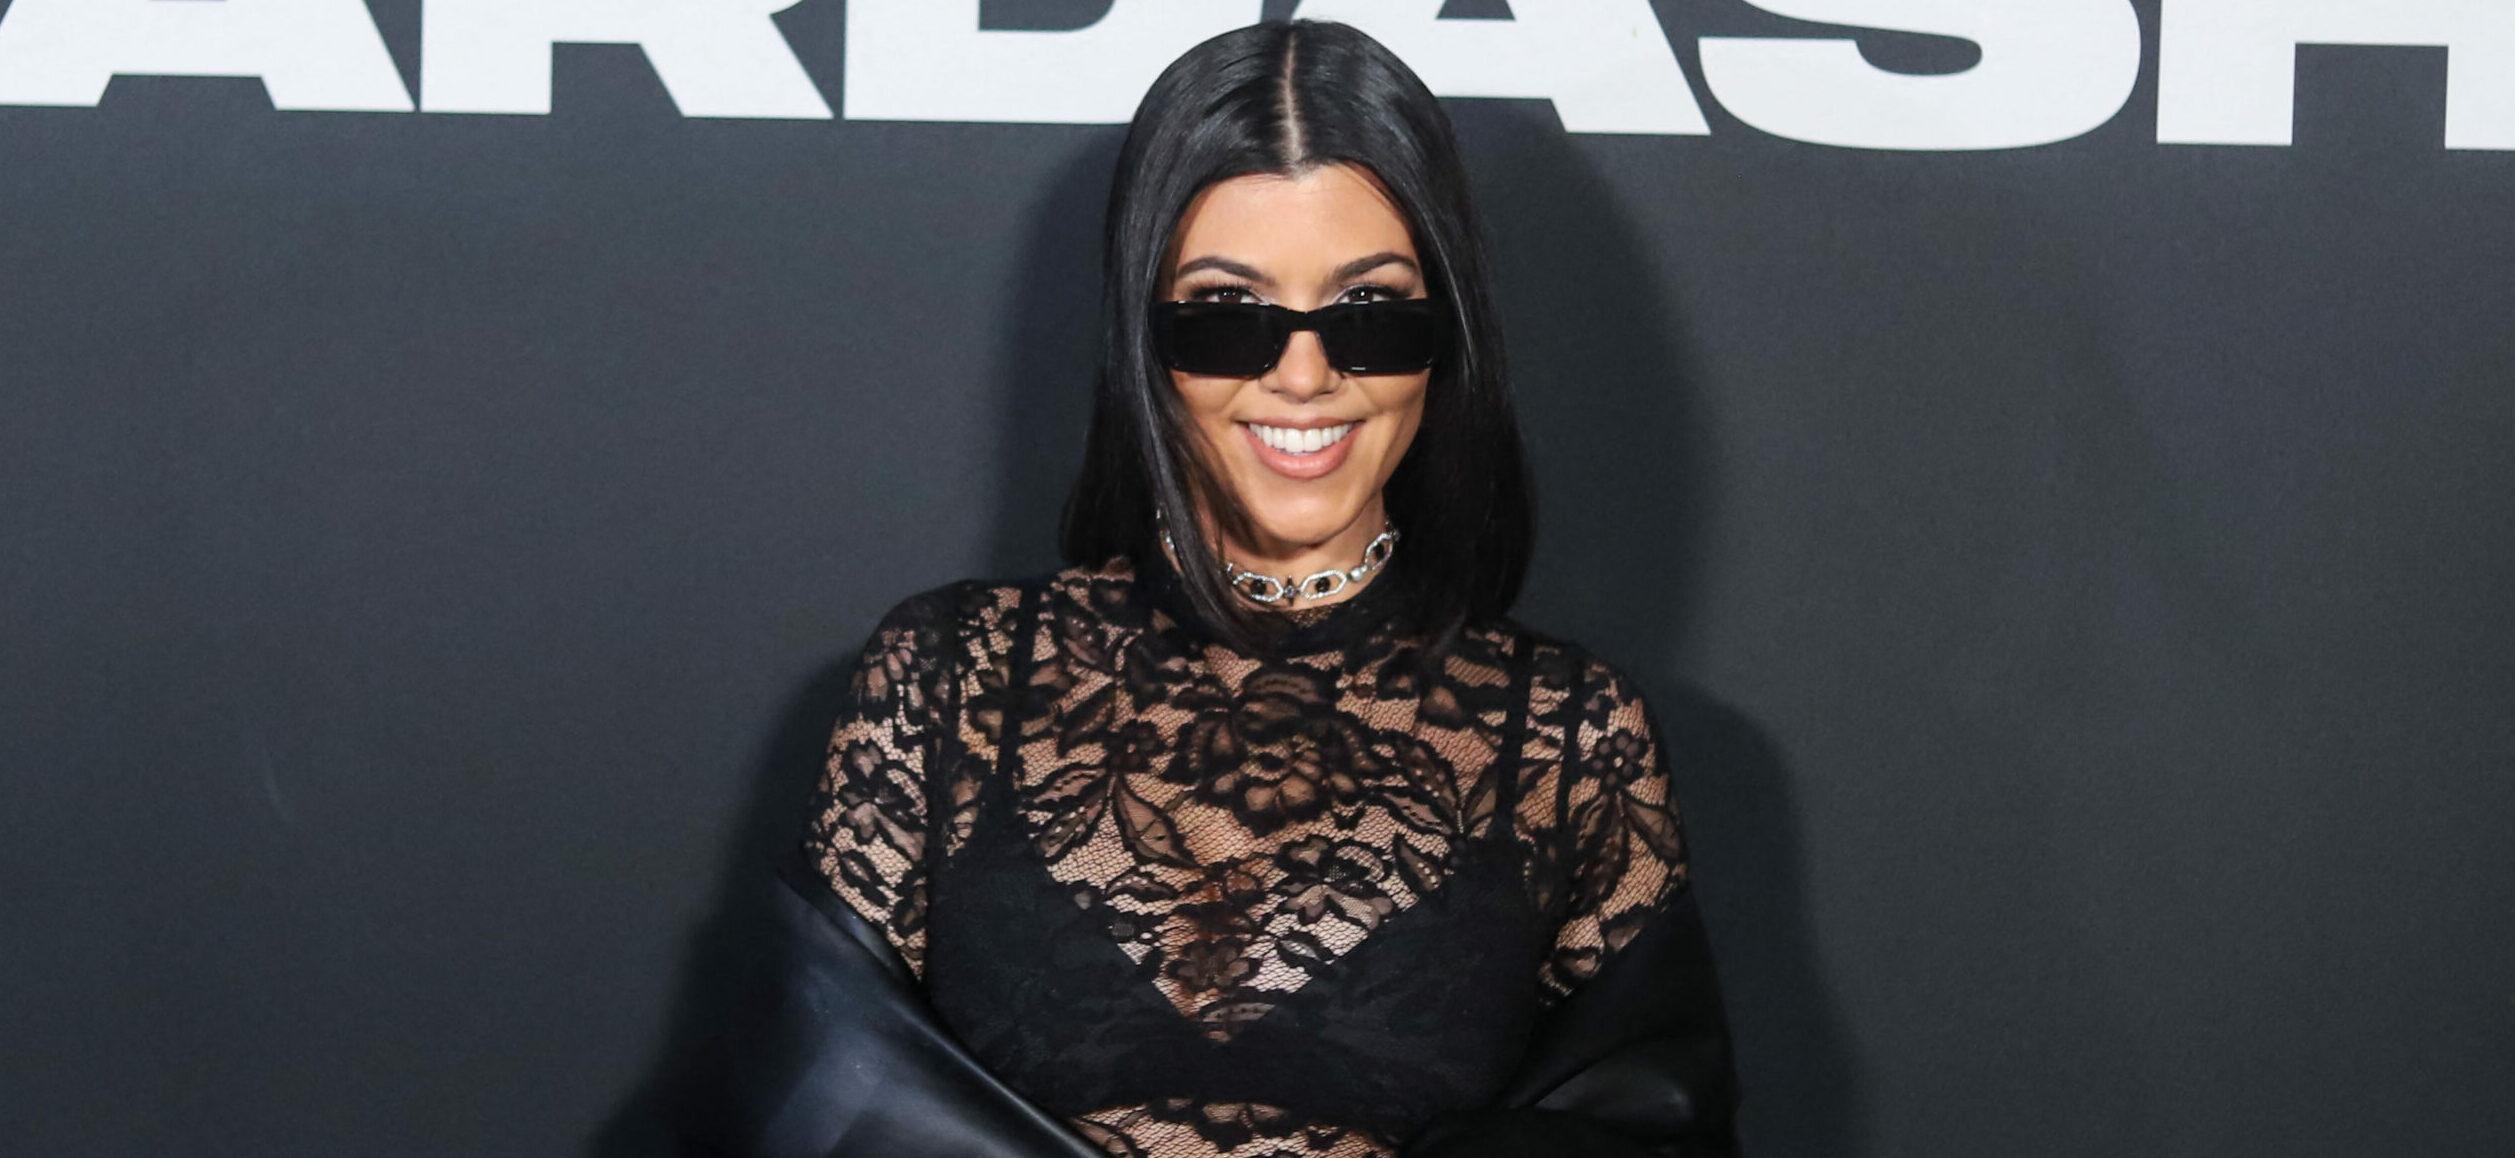 Kourtney Kardashian Is All About ‘Positive Vibrations’ During Pregnancy